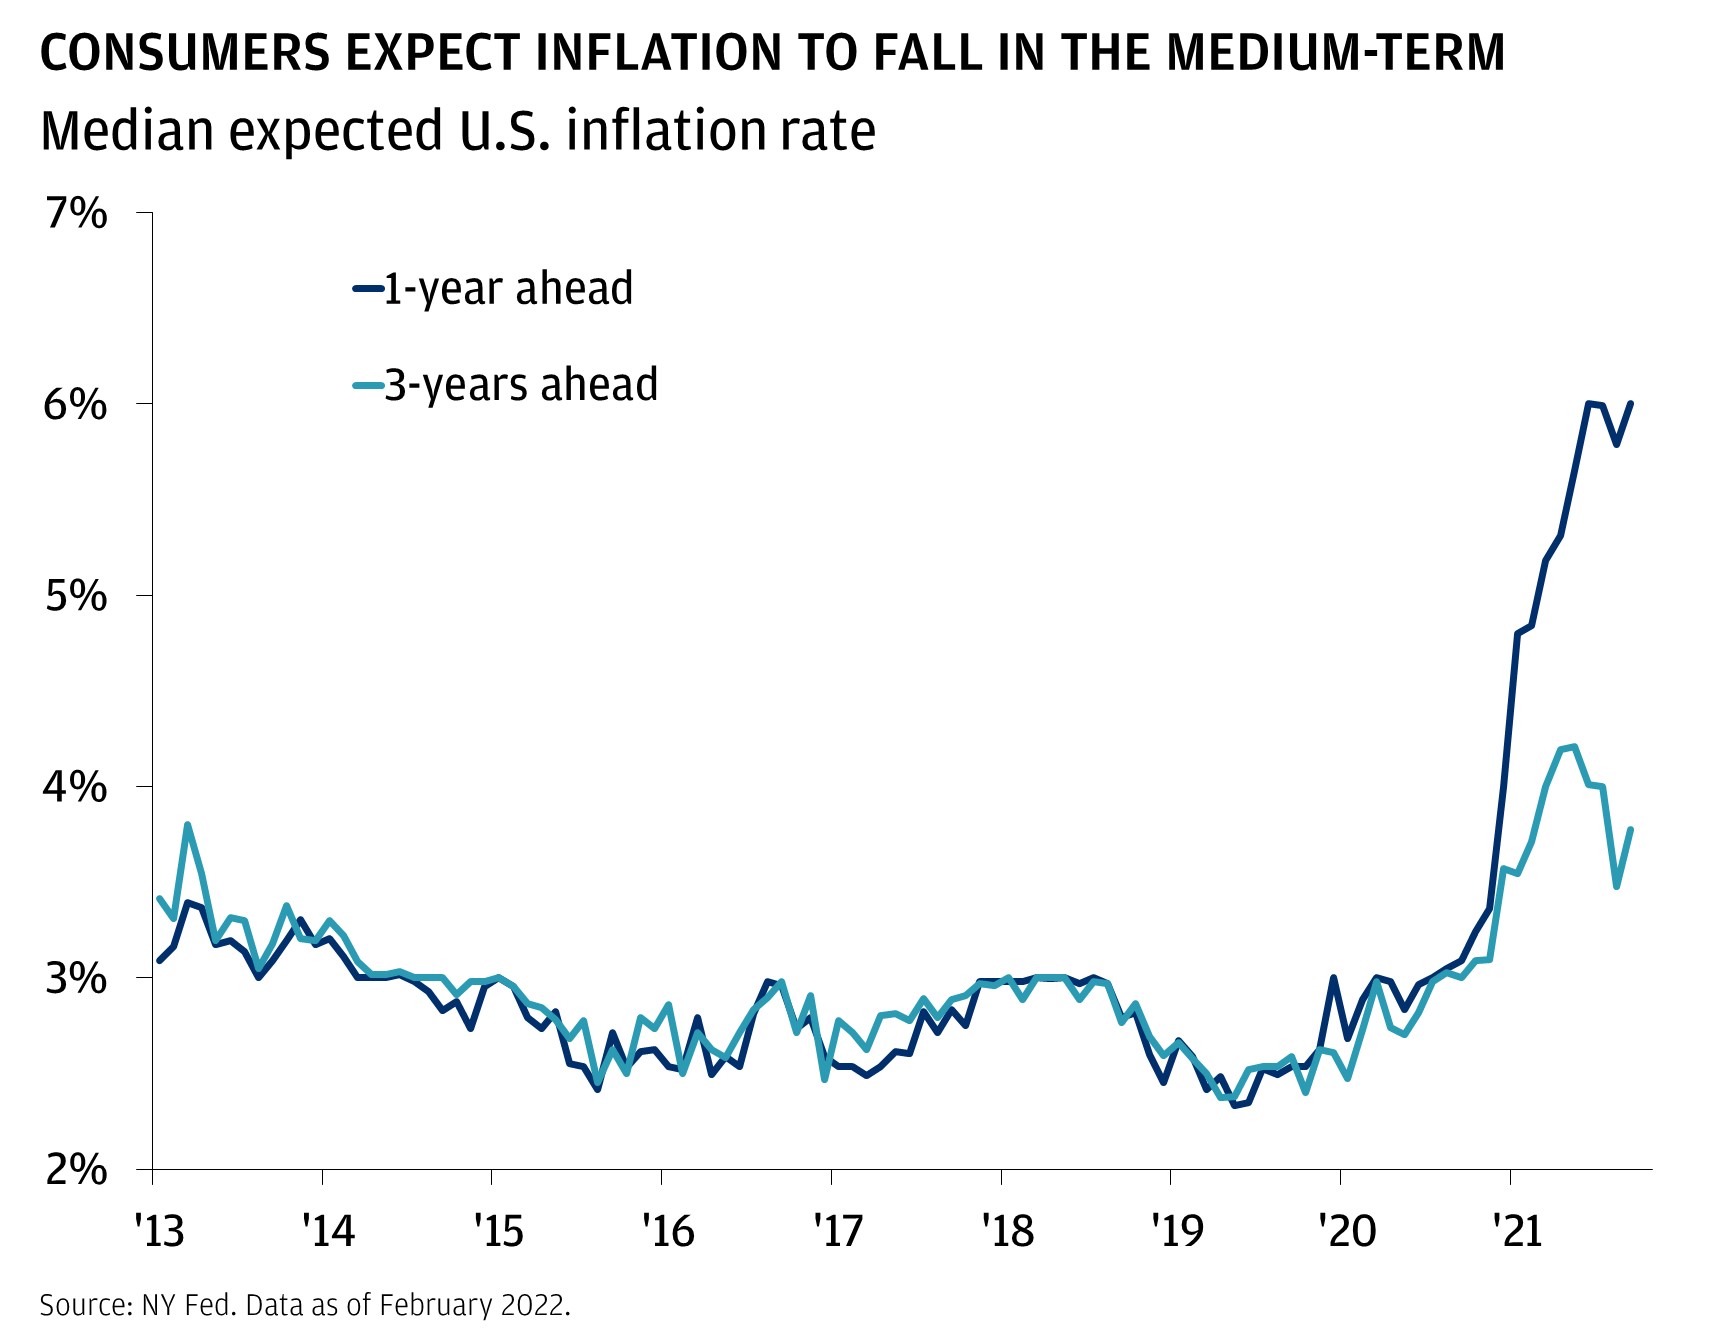 This chart shows the U.S. median expected inflation rate one year ahead and three years ahead from 2013 to February 2022. CONSUMERS EXPECT INFLATION TO FALL IN THE MEDIUM-TERM